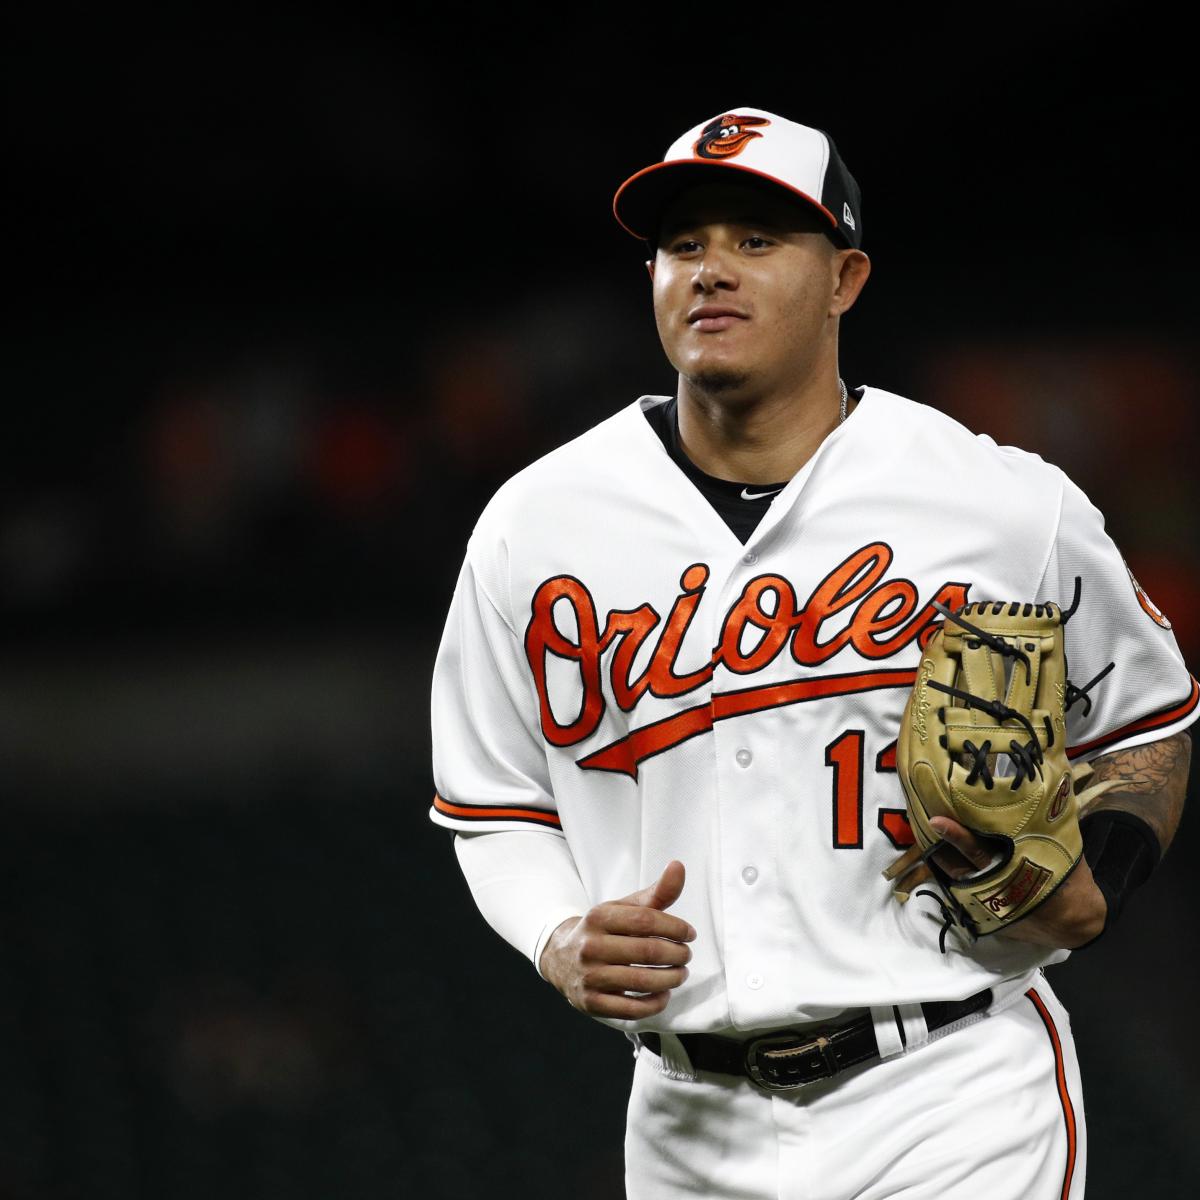 Manny Machado apologizes for not running out ground ball - NBC Sports